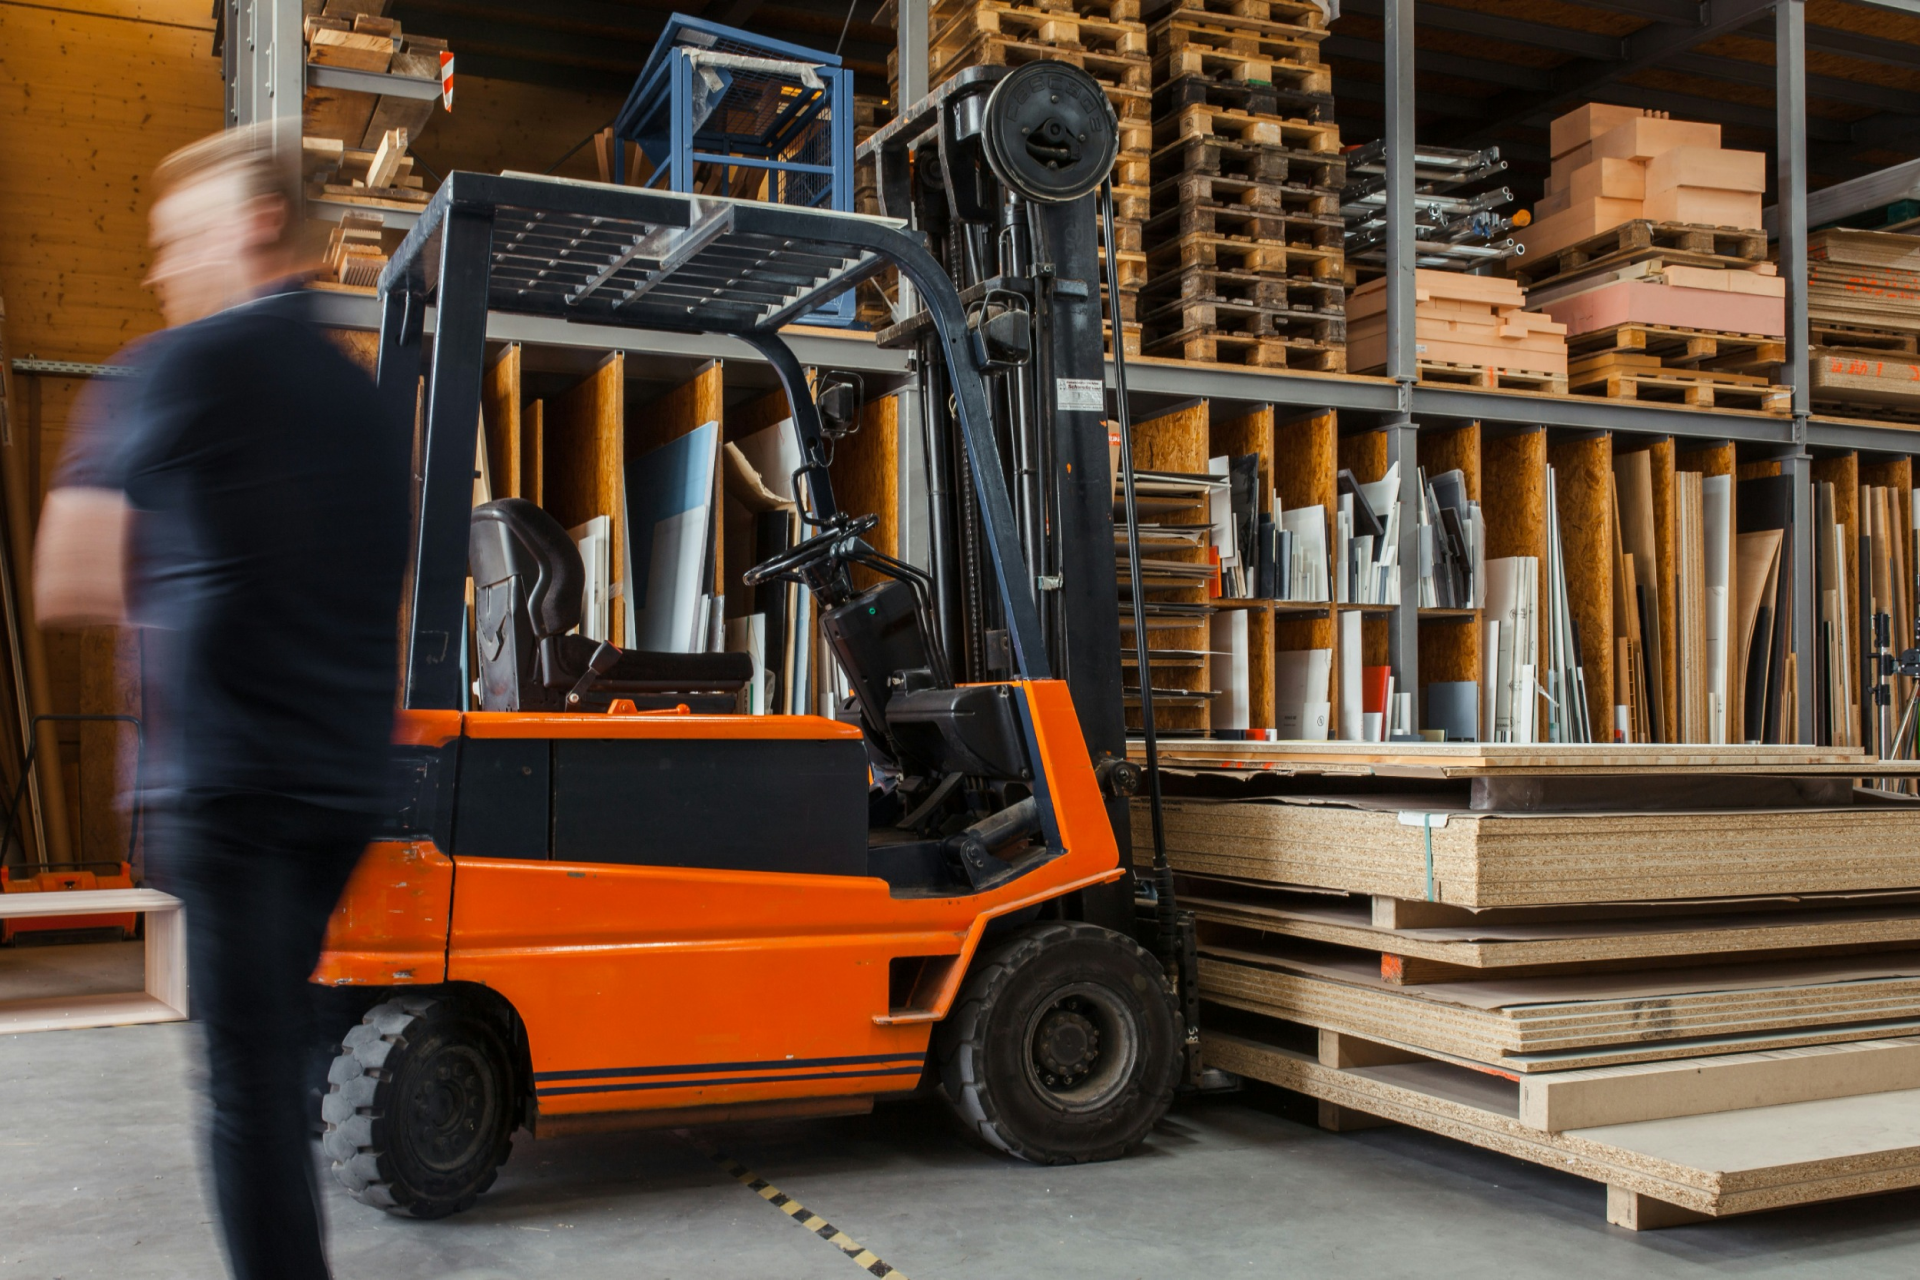 Inventory Management VS Warehouse Management: Key Differences